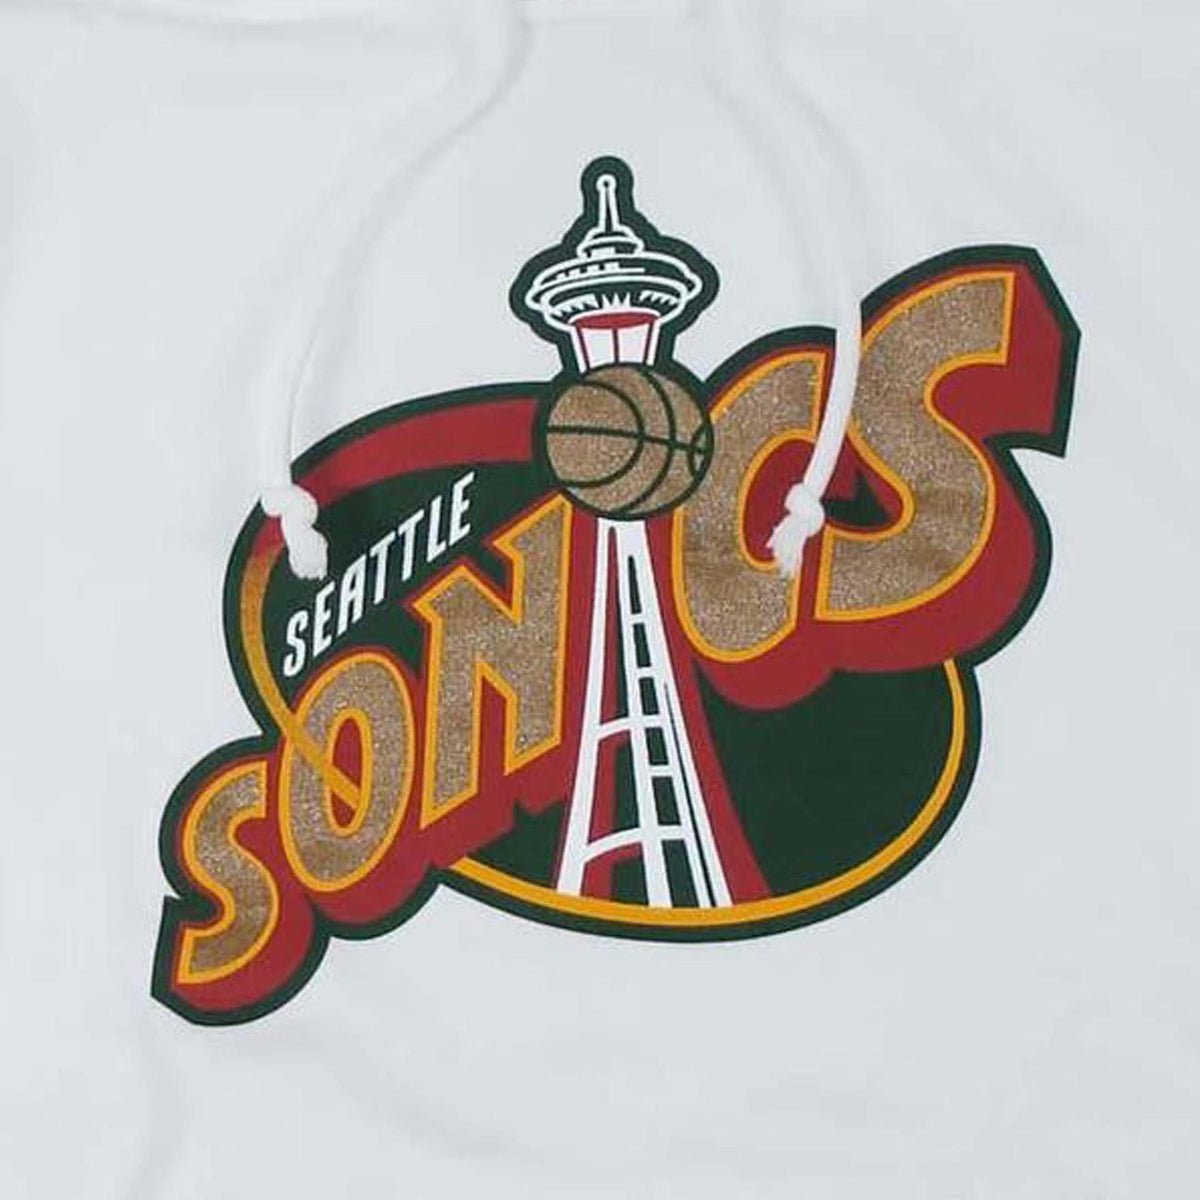 Seattle SuperSonics hoodie. Small stain on pocket